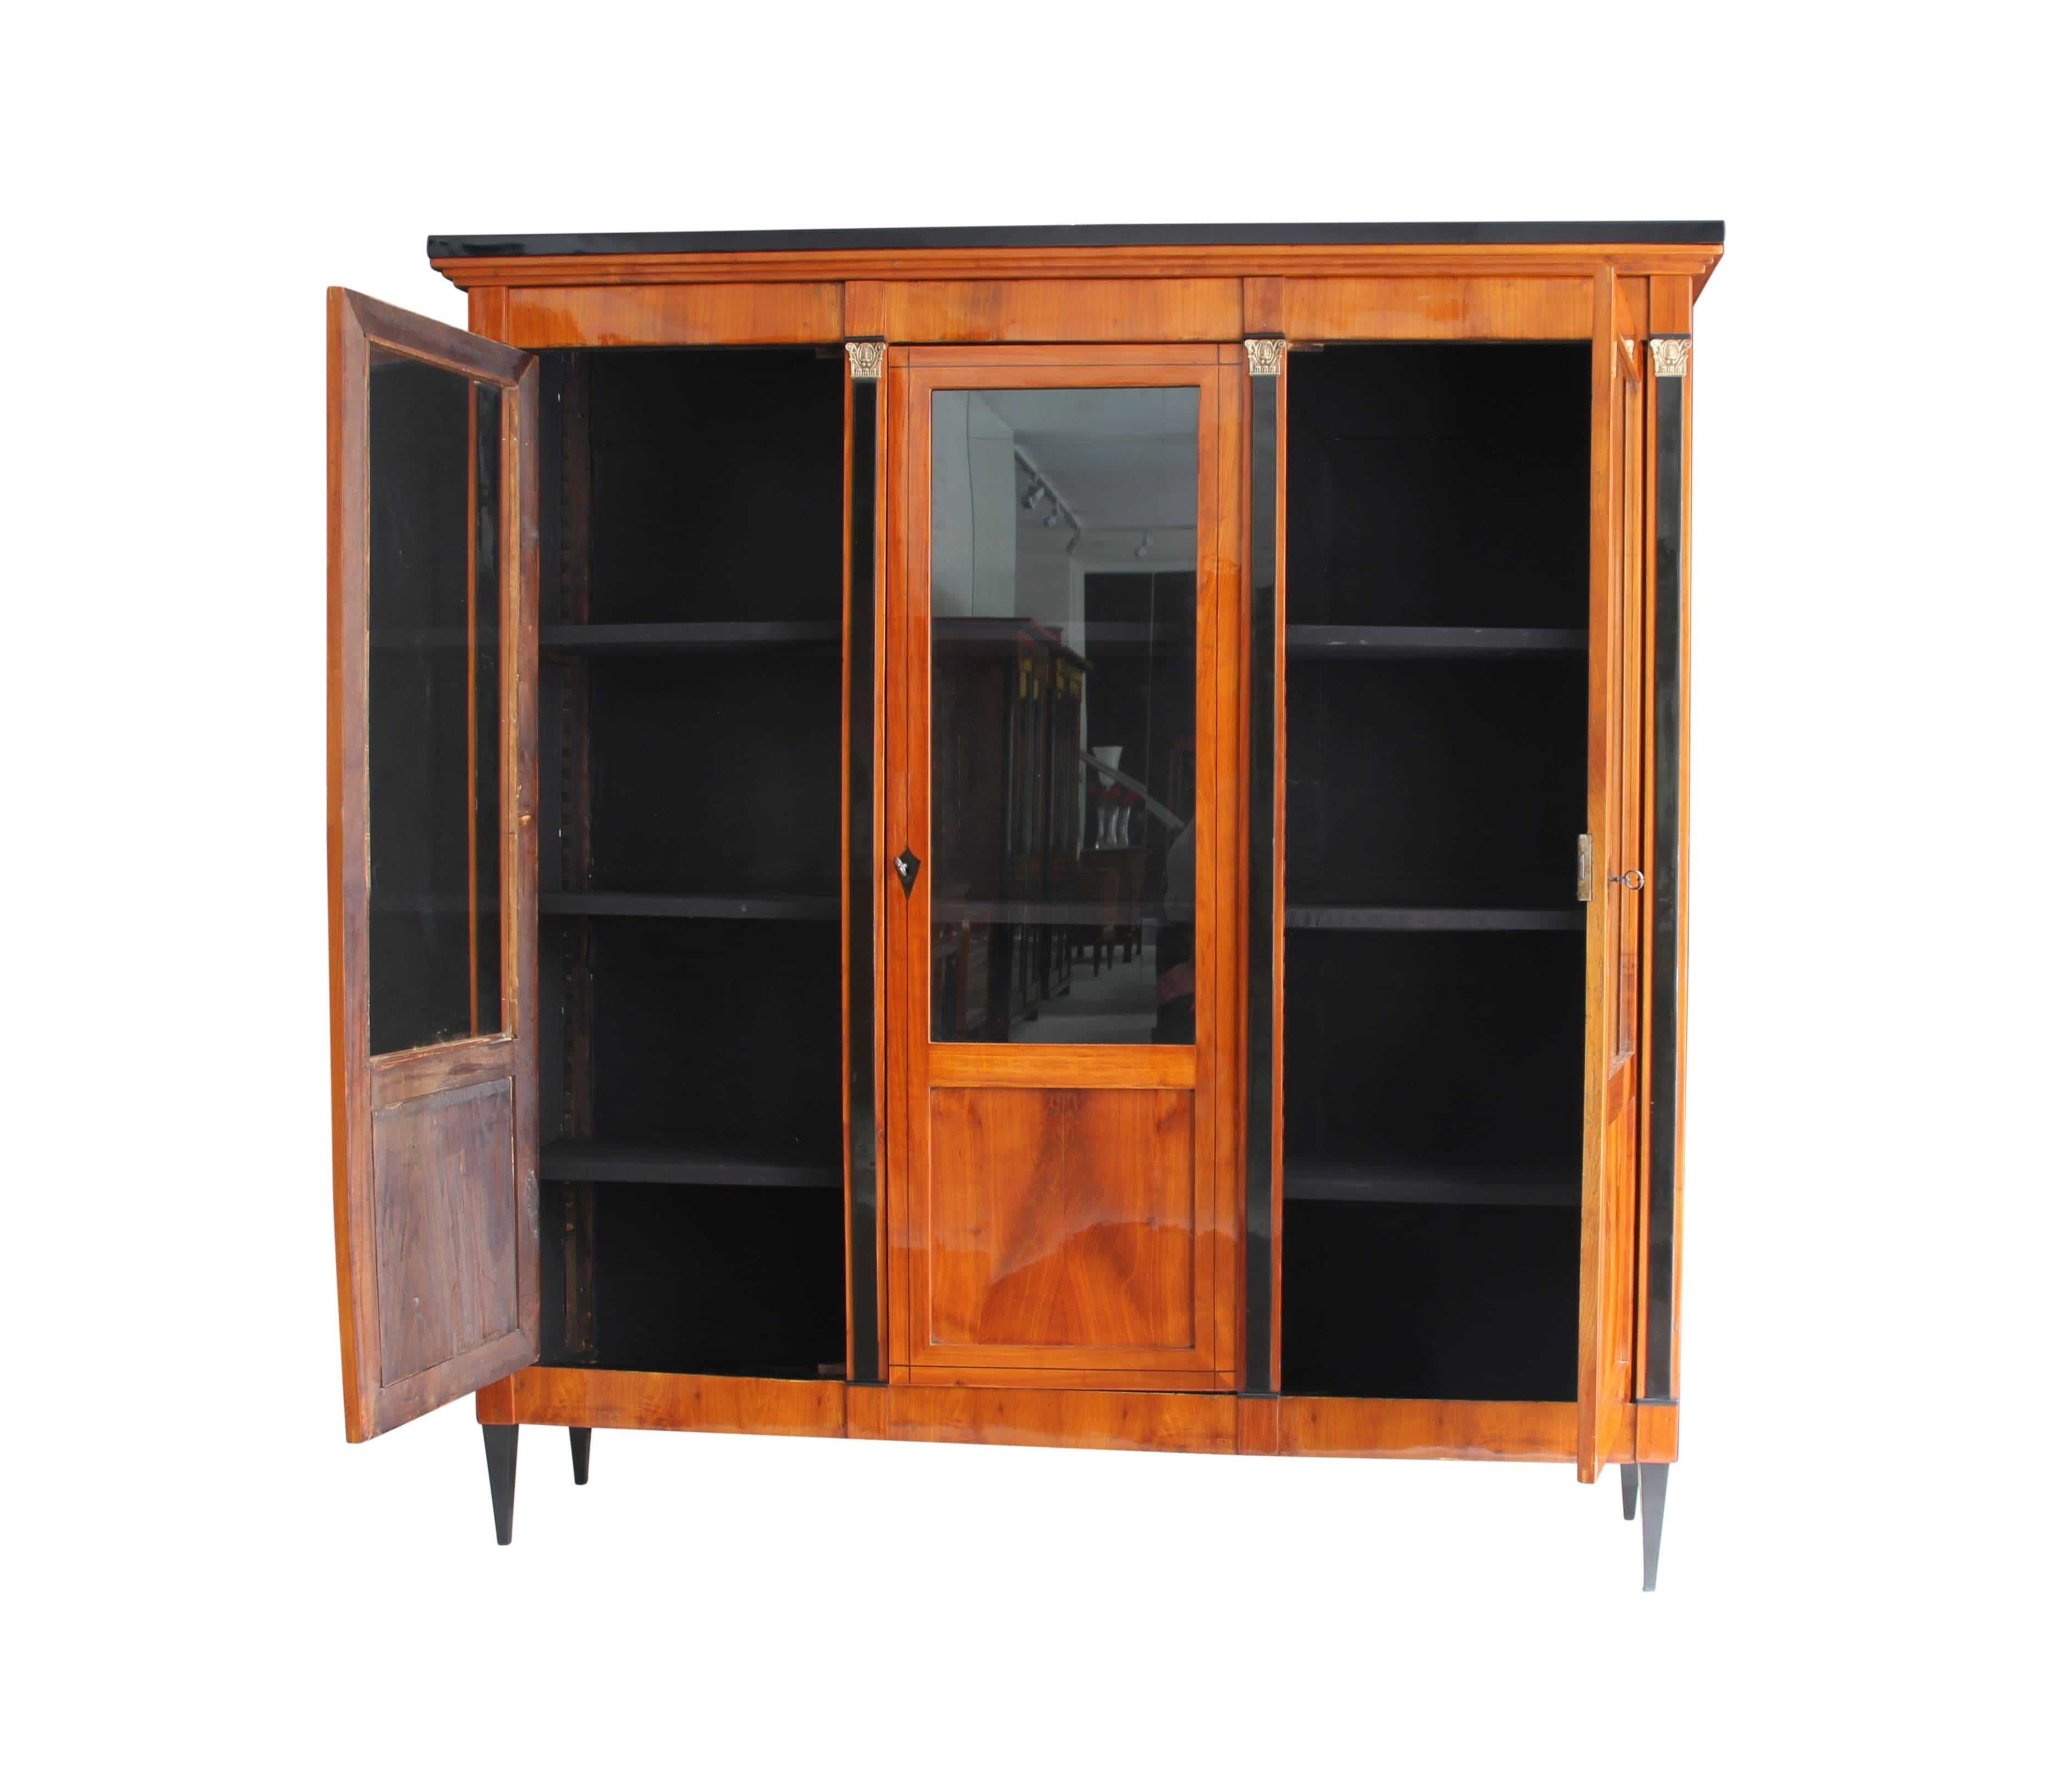 Very elegant three-doored Biedermeier bookcase from 2nd half of the 19th century.

Wonderful cherry veneer and solid wood. All original brass metals and old glasses.
The doors are separated with ebonized pilaster columns with brass capitals.

On the